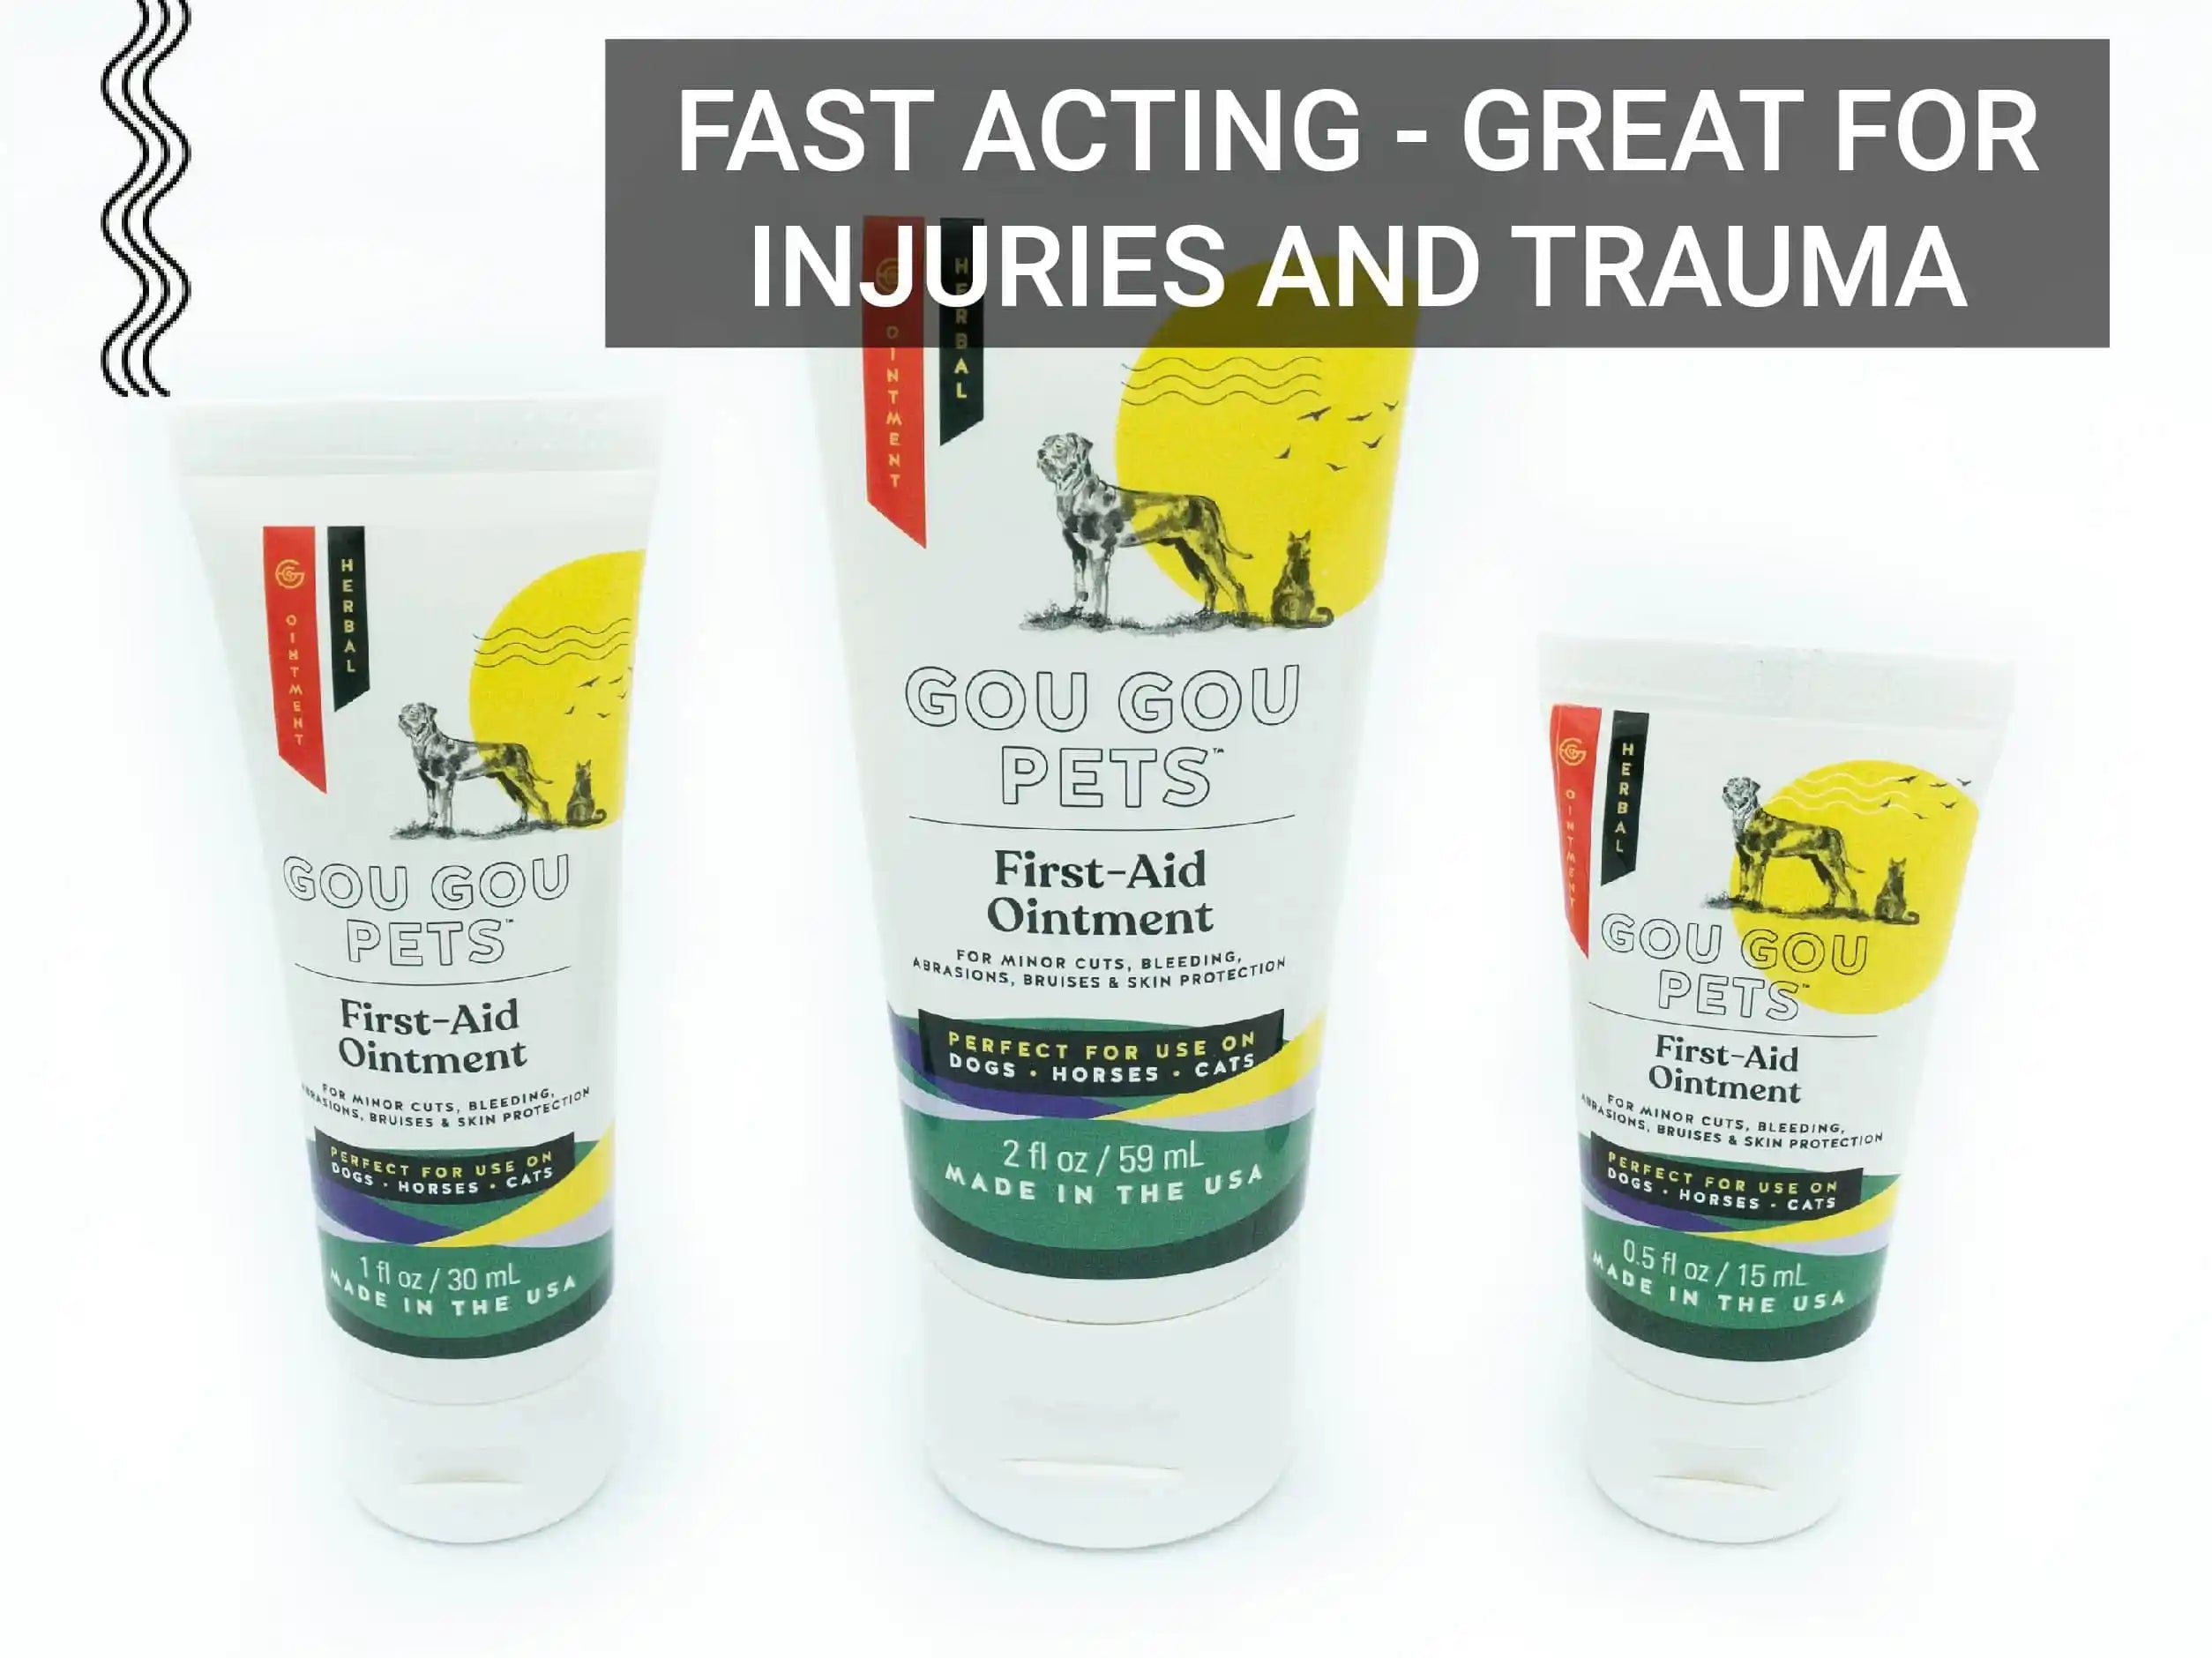 Gou Gou Pets First Aid Ointment for Dogs, Cats, and Horses